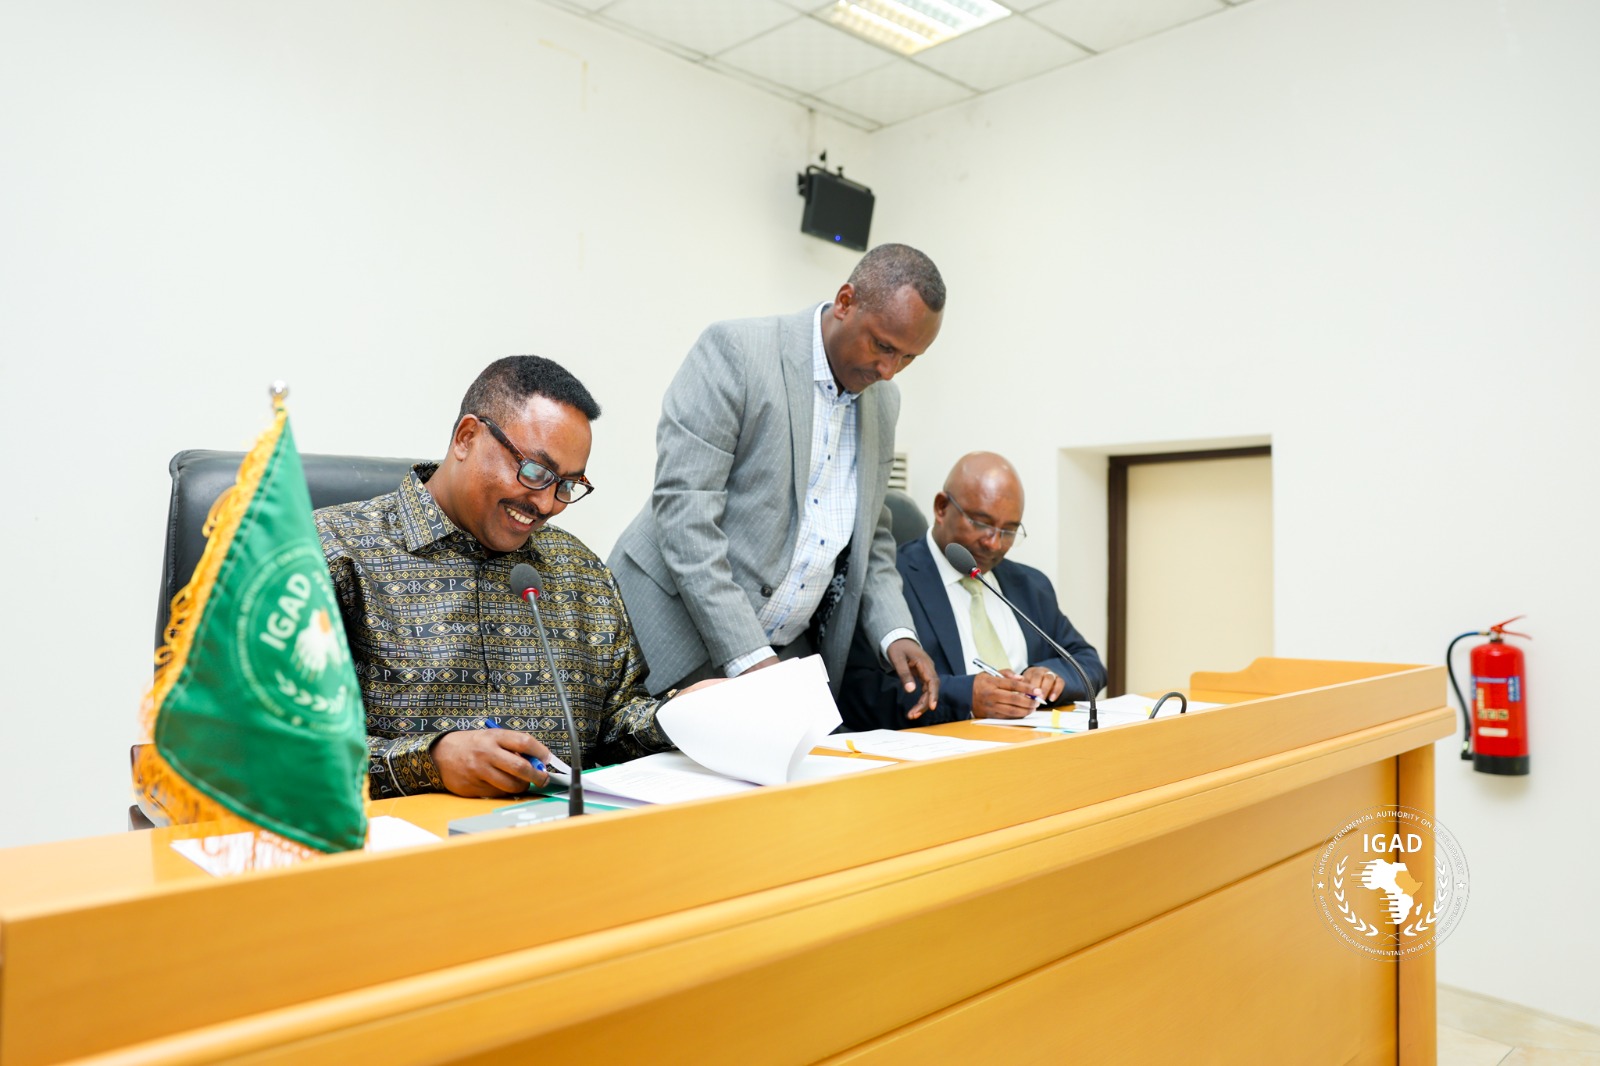 ANE signed a sub-delegation agreement with IGAD 3